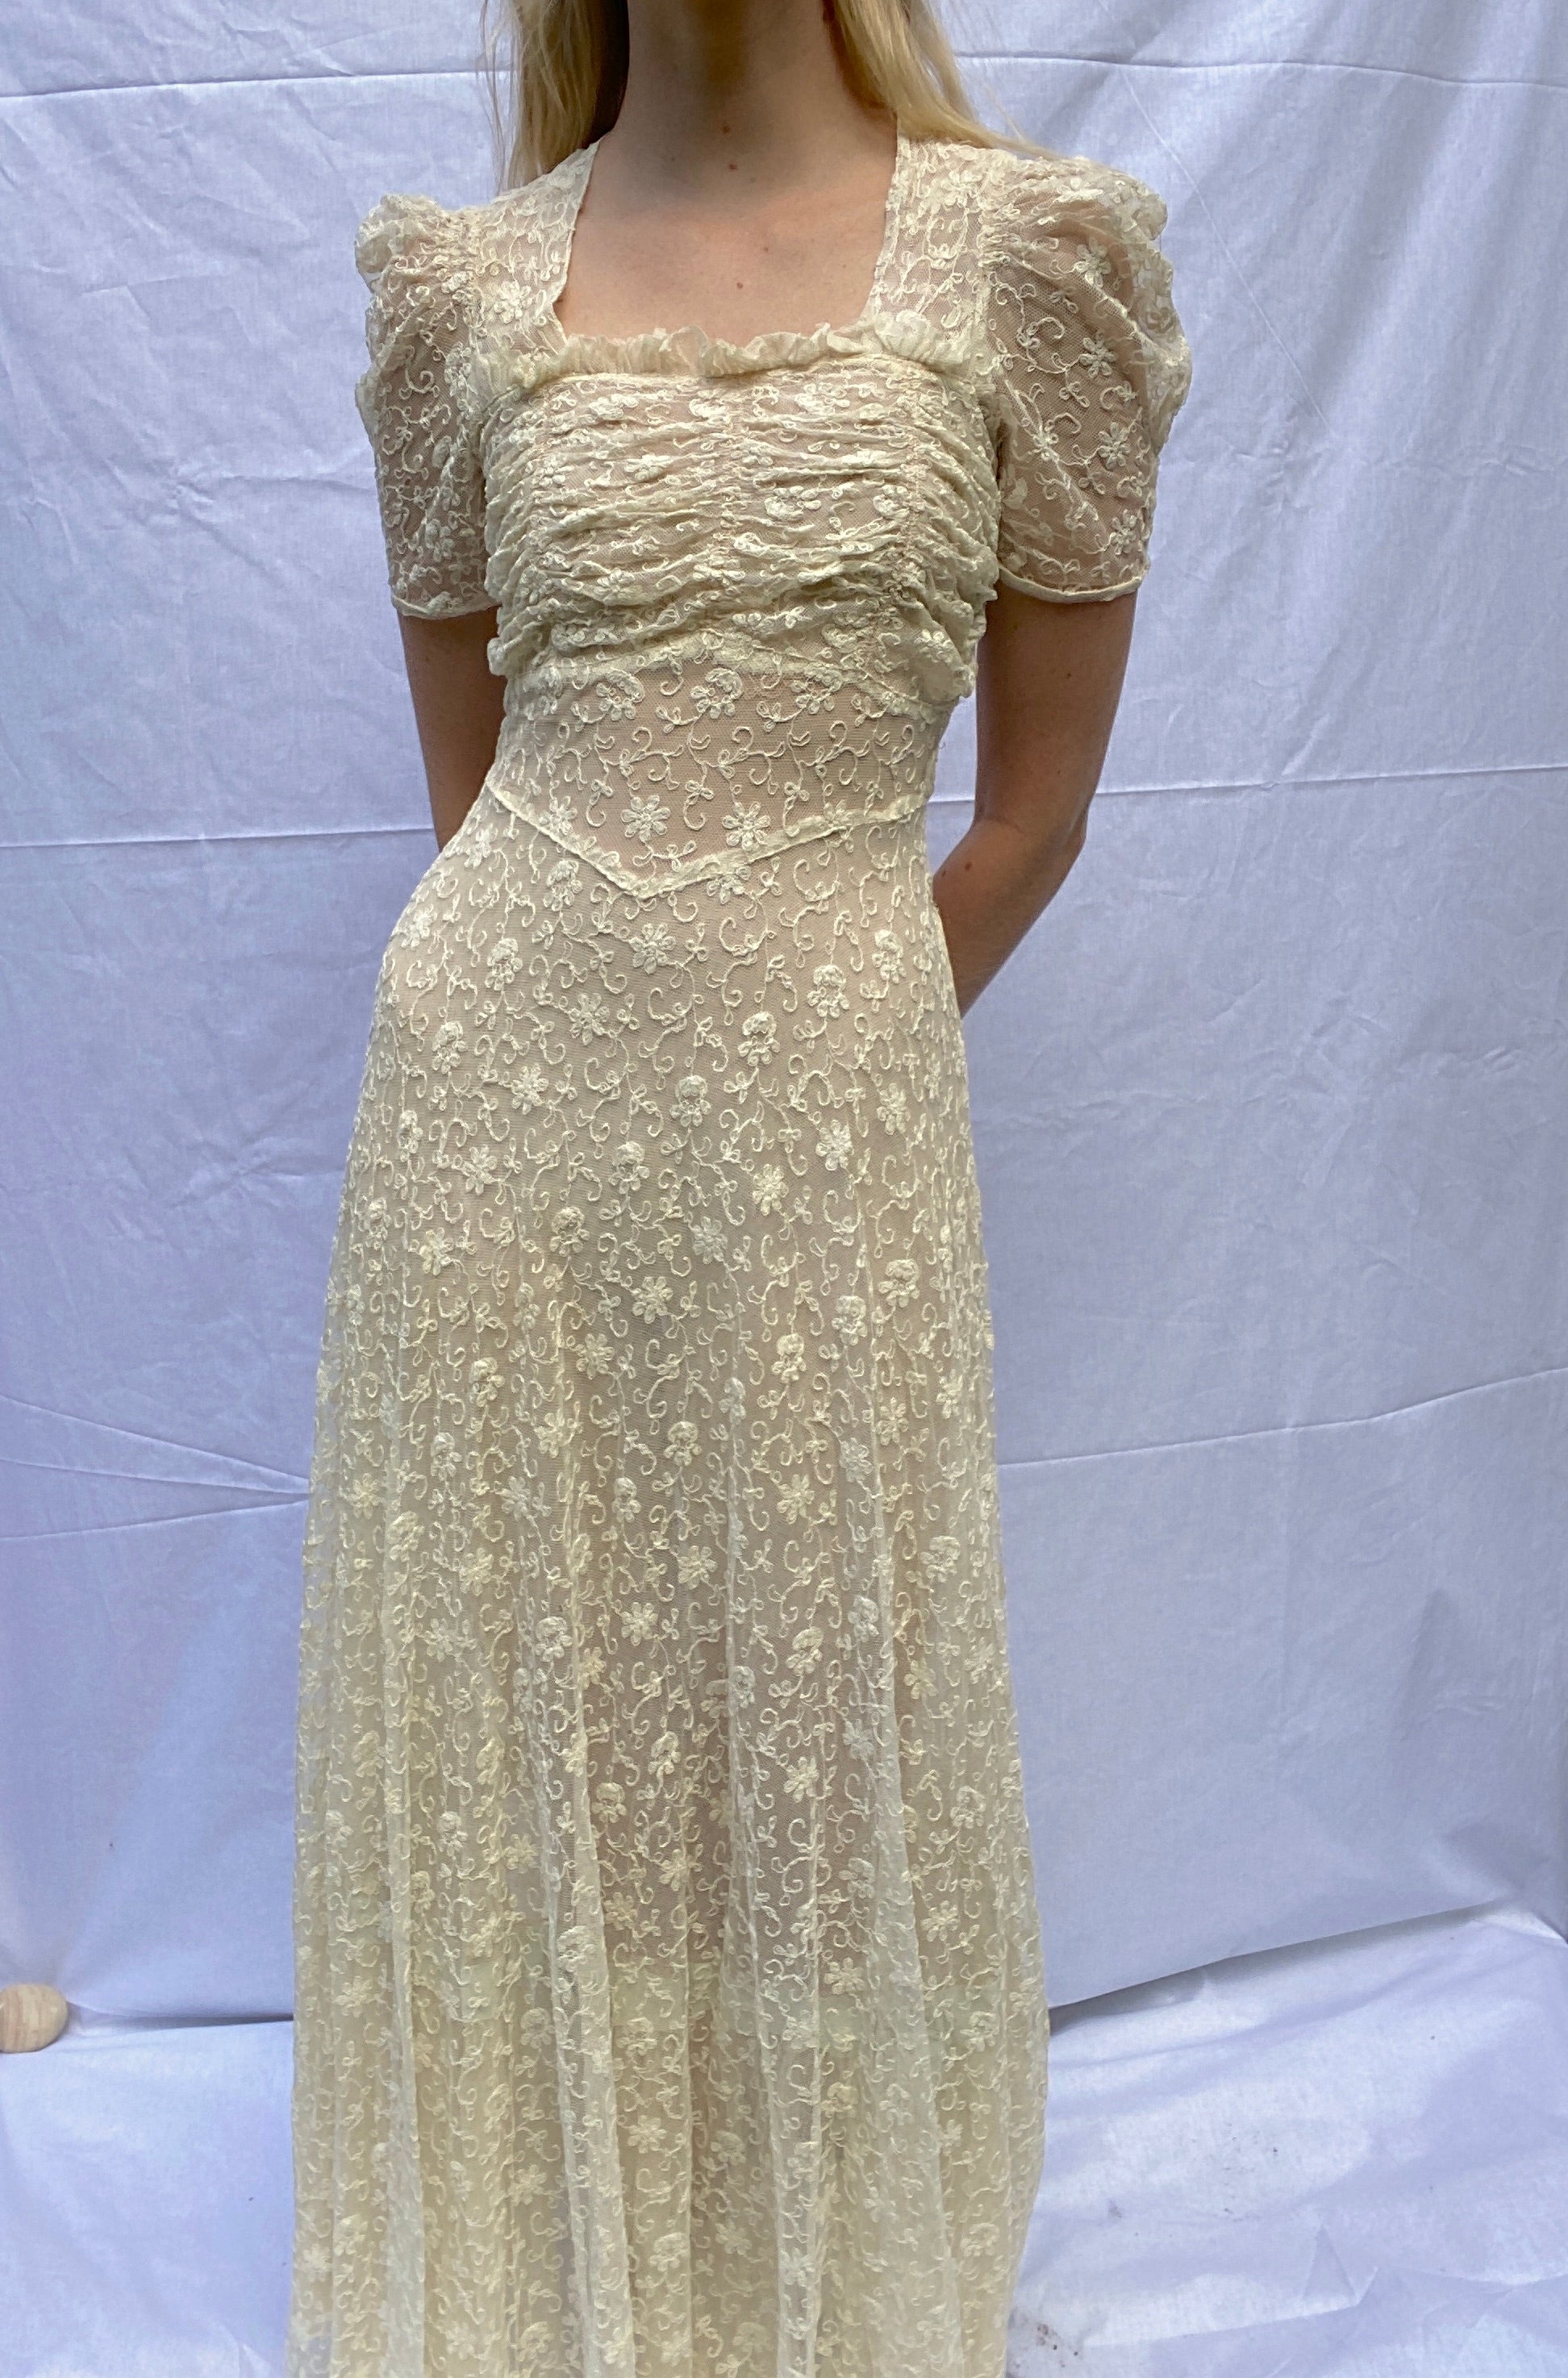 1940's Embroidered Cream Cotton Net Summer Party Dress